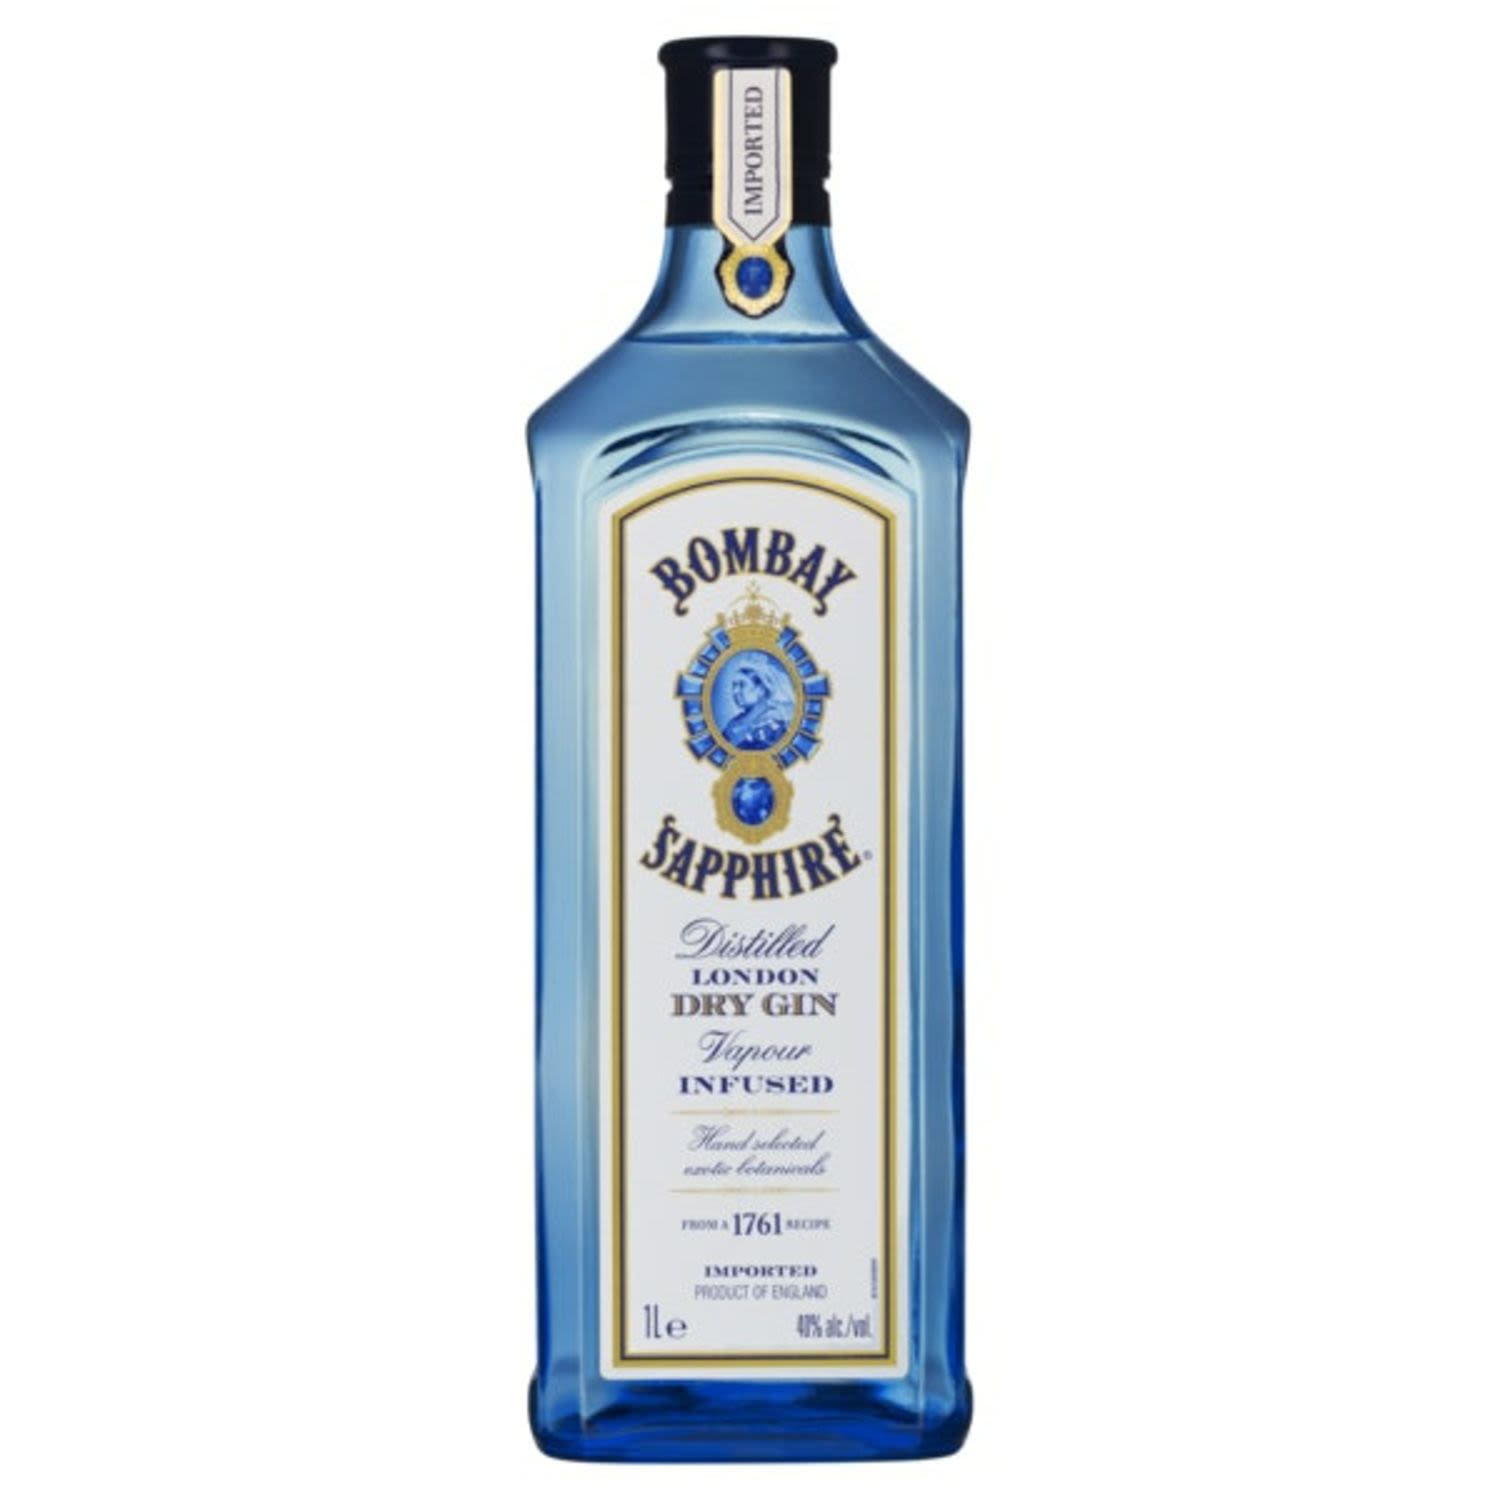 Bombay Sapphire Gin is a uniquely balanced premium gin, leading the gin revival worldwide. It is recognisable by its exquisite bottle shape and distinctive sapphire-blue livery.<br /> <br />Alcohol Volume: 40.00%<br /><br />Pack Format: Bottle<br /><br />Standard Drinks: 31.6</br /><br />Pack Type: Bottle<br /><br />Country of Origin: England<br />